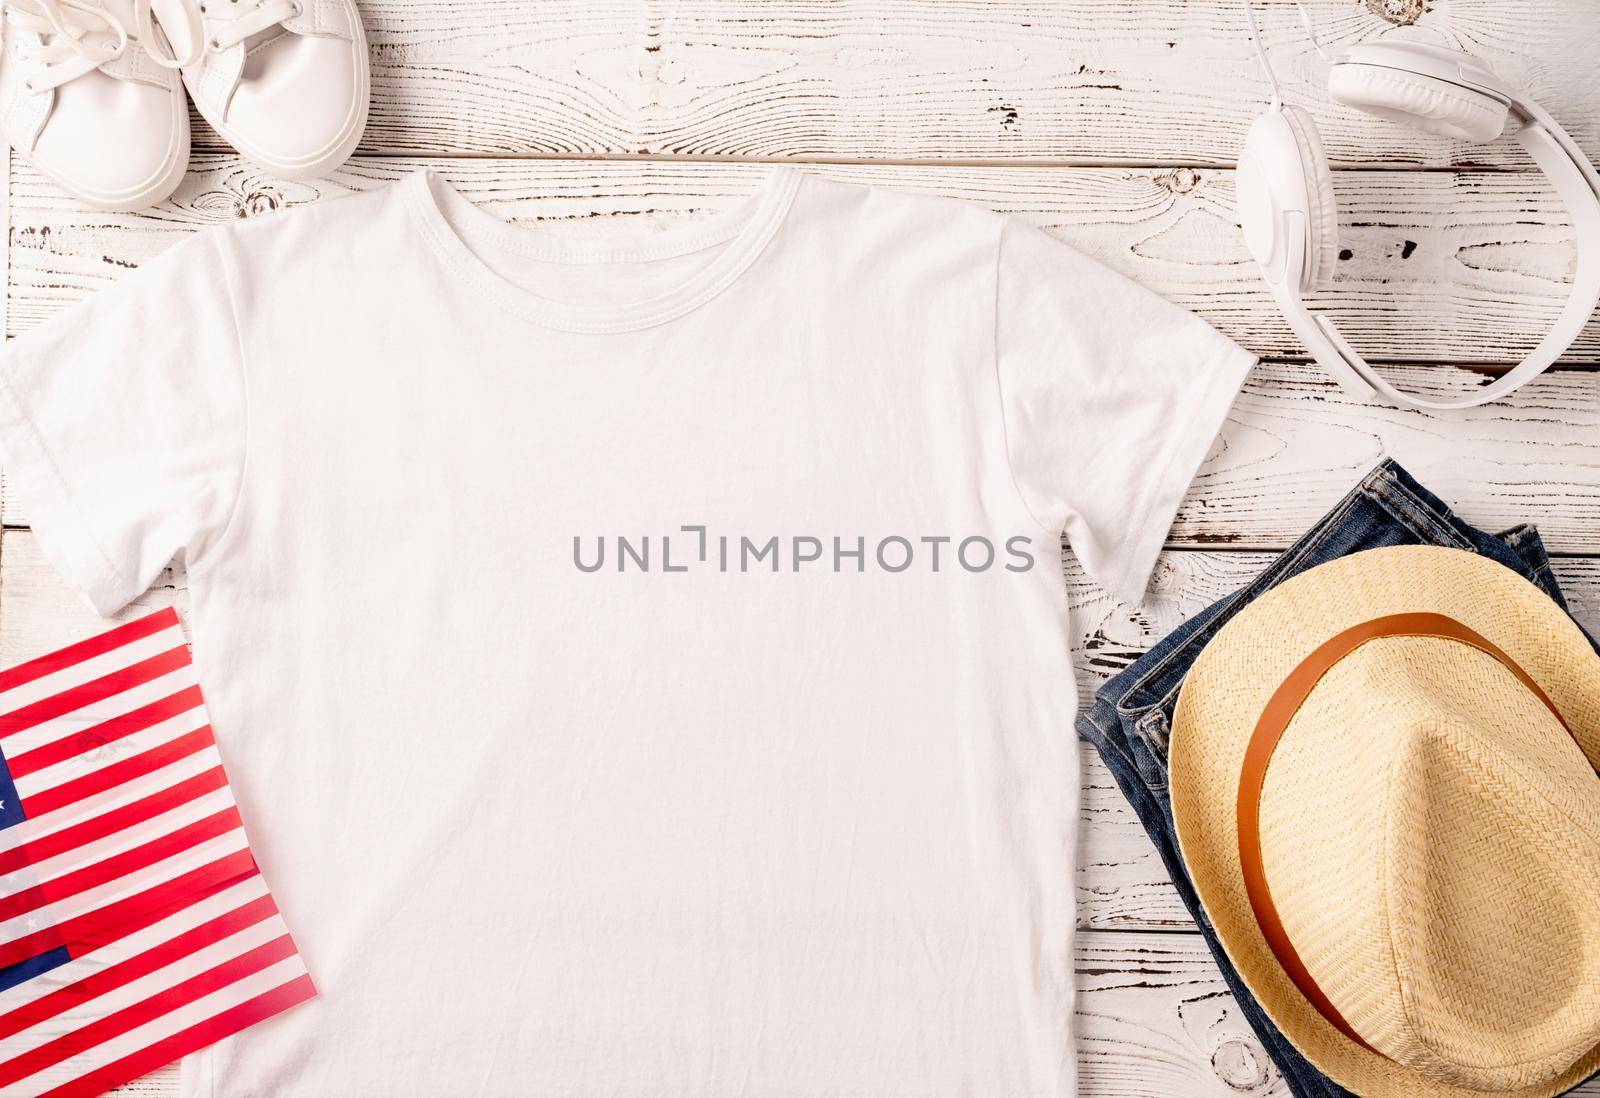 USA Memorial day, Presidents day, Veterans day, Labor day, or 4th of July celebration. Mockup design polo t shirt for logo, top view on white wooden background with US flag and jeans